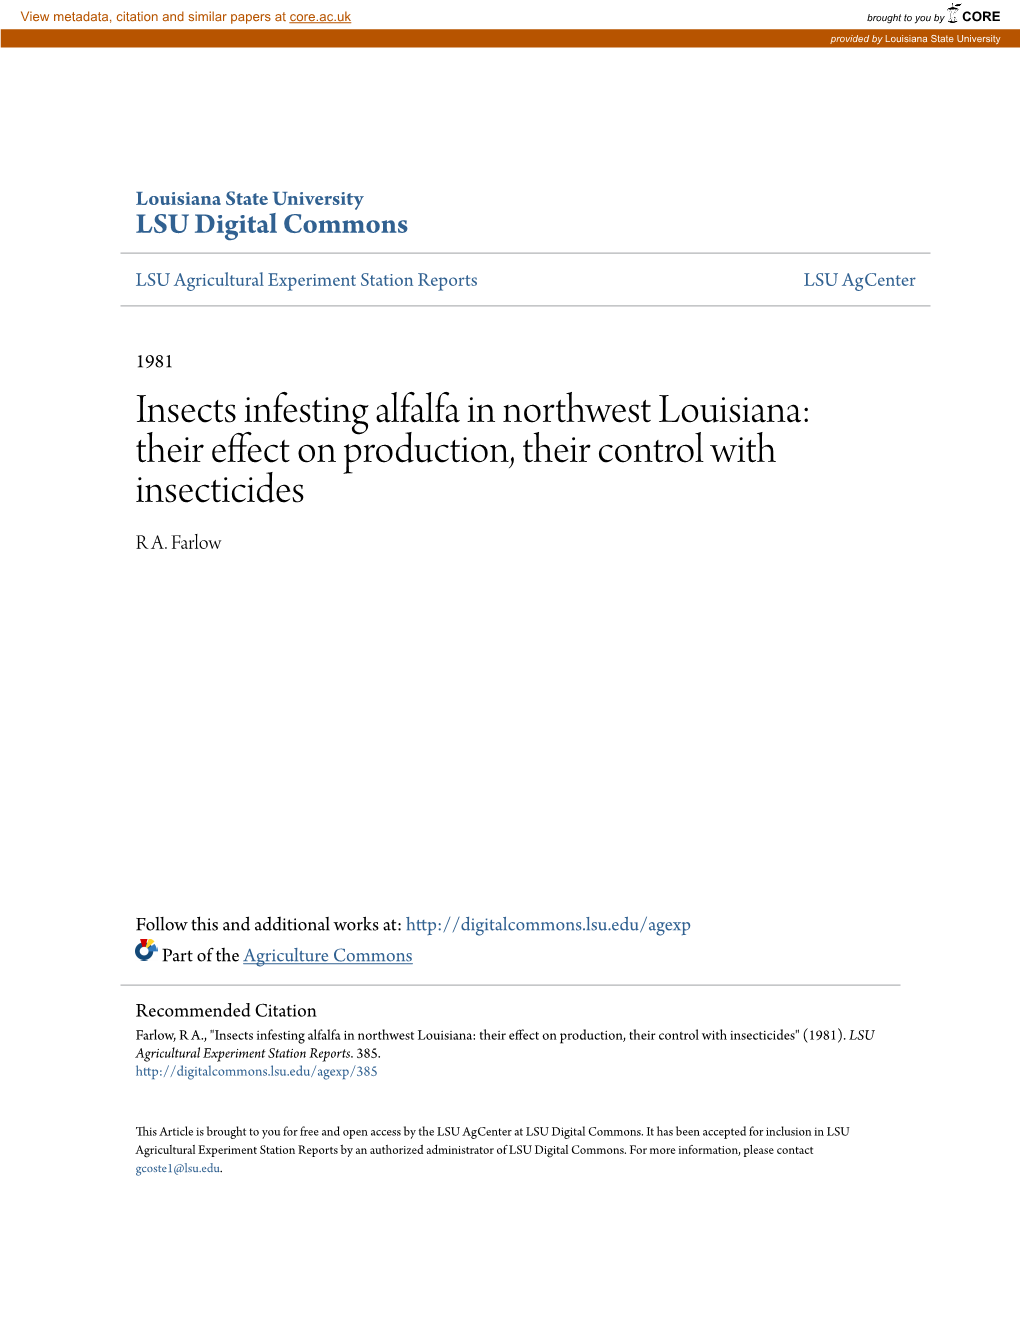 Insects Infesting Alfalfa in Northwest Louisiana: Their Effect on Production, Their Control with Insecticides R A